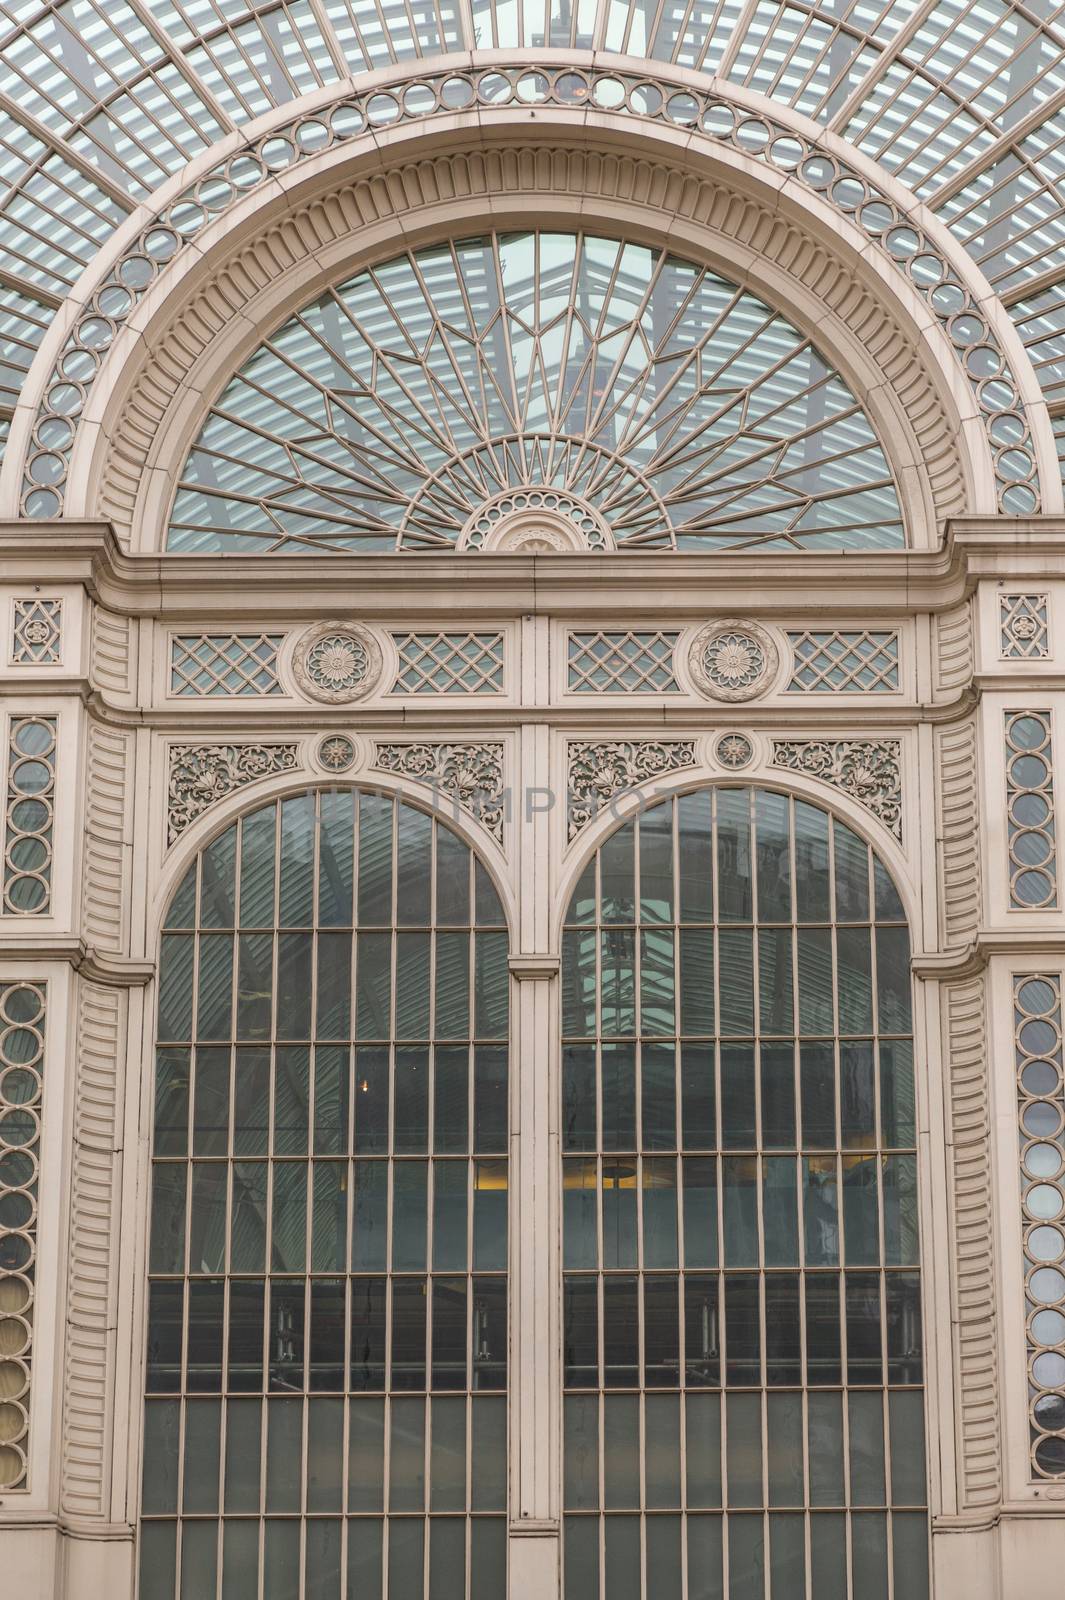 Glass and Steel canopy structure in the West End of London near Covent Garden